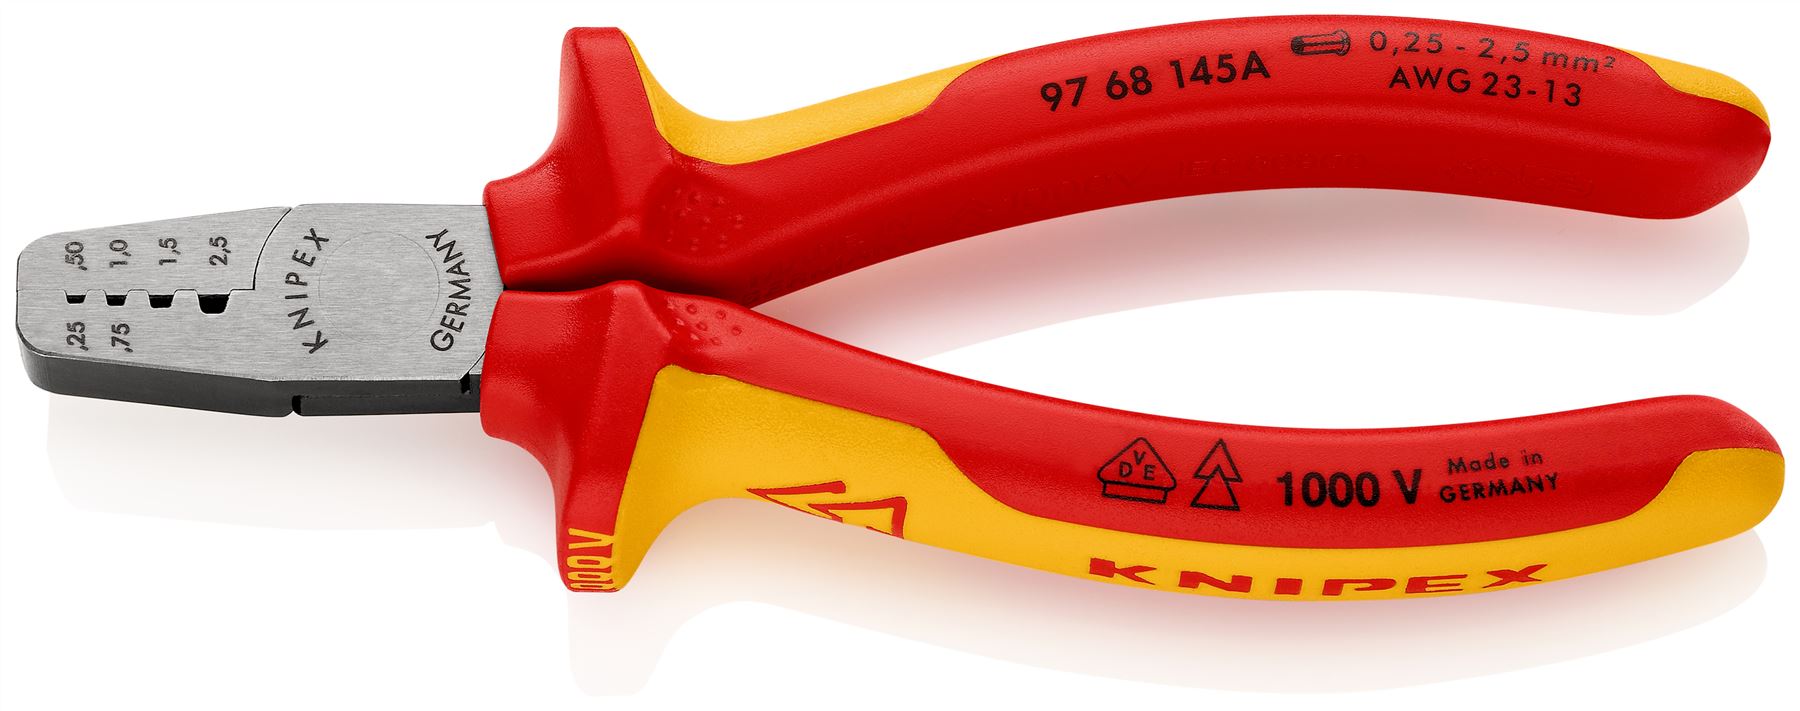 KNIPEX Crimping Pliers for Wire Ferrules 145mm 0.25-2.5mm² 145mm VDE Insulated Multi Component Grips 97 68 145 A